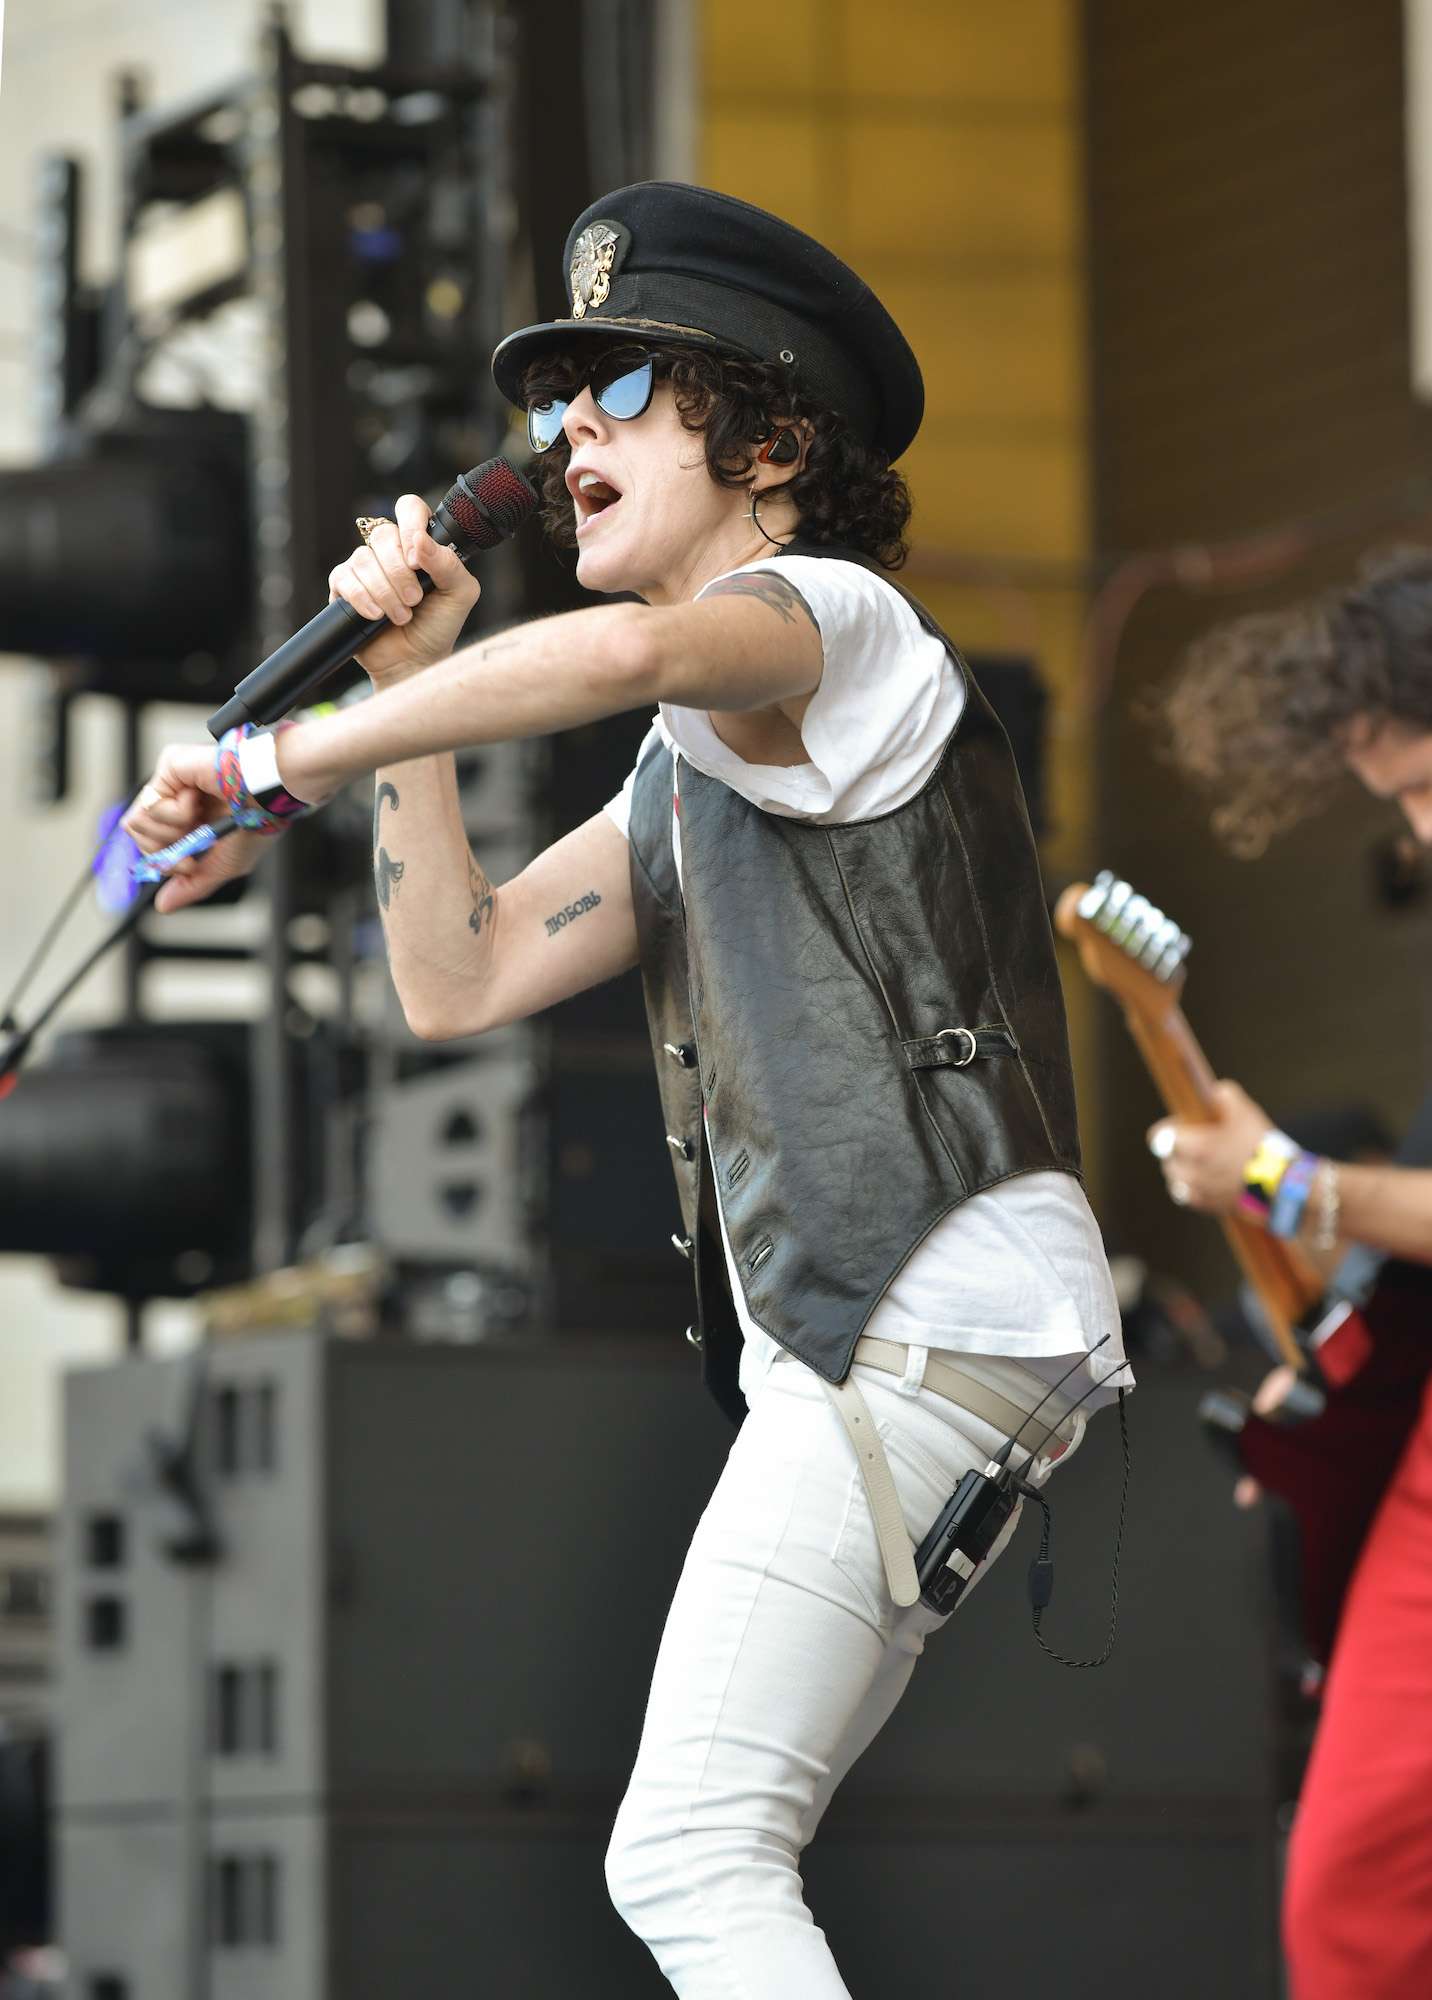 LP Live at Lollapalooza [GALLERY] 9